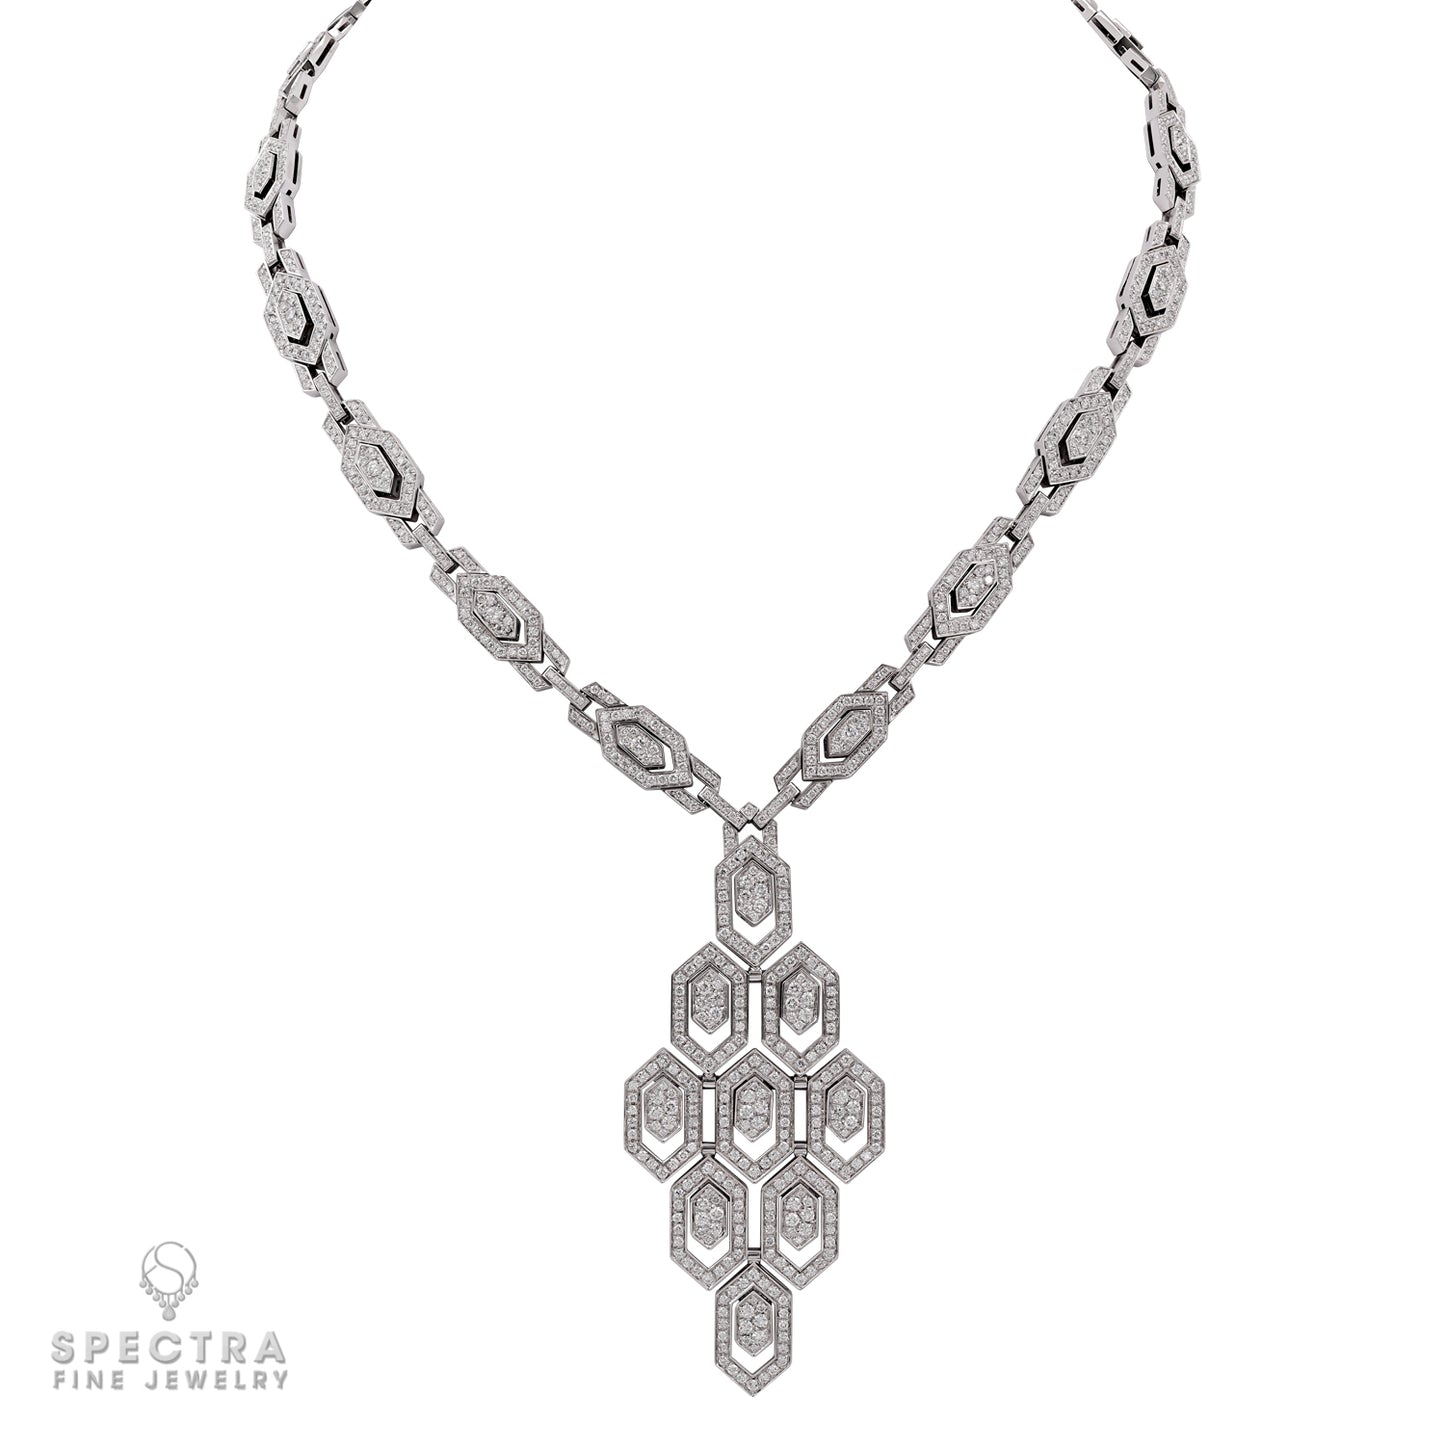 Bulgari 18k White Gold and Diamond Necklace: A Timeless Masterpiece of Elegance and Luxury